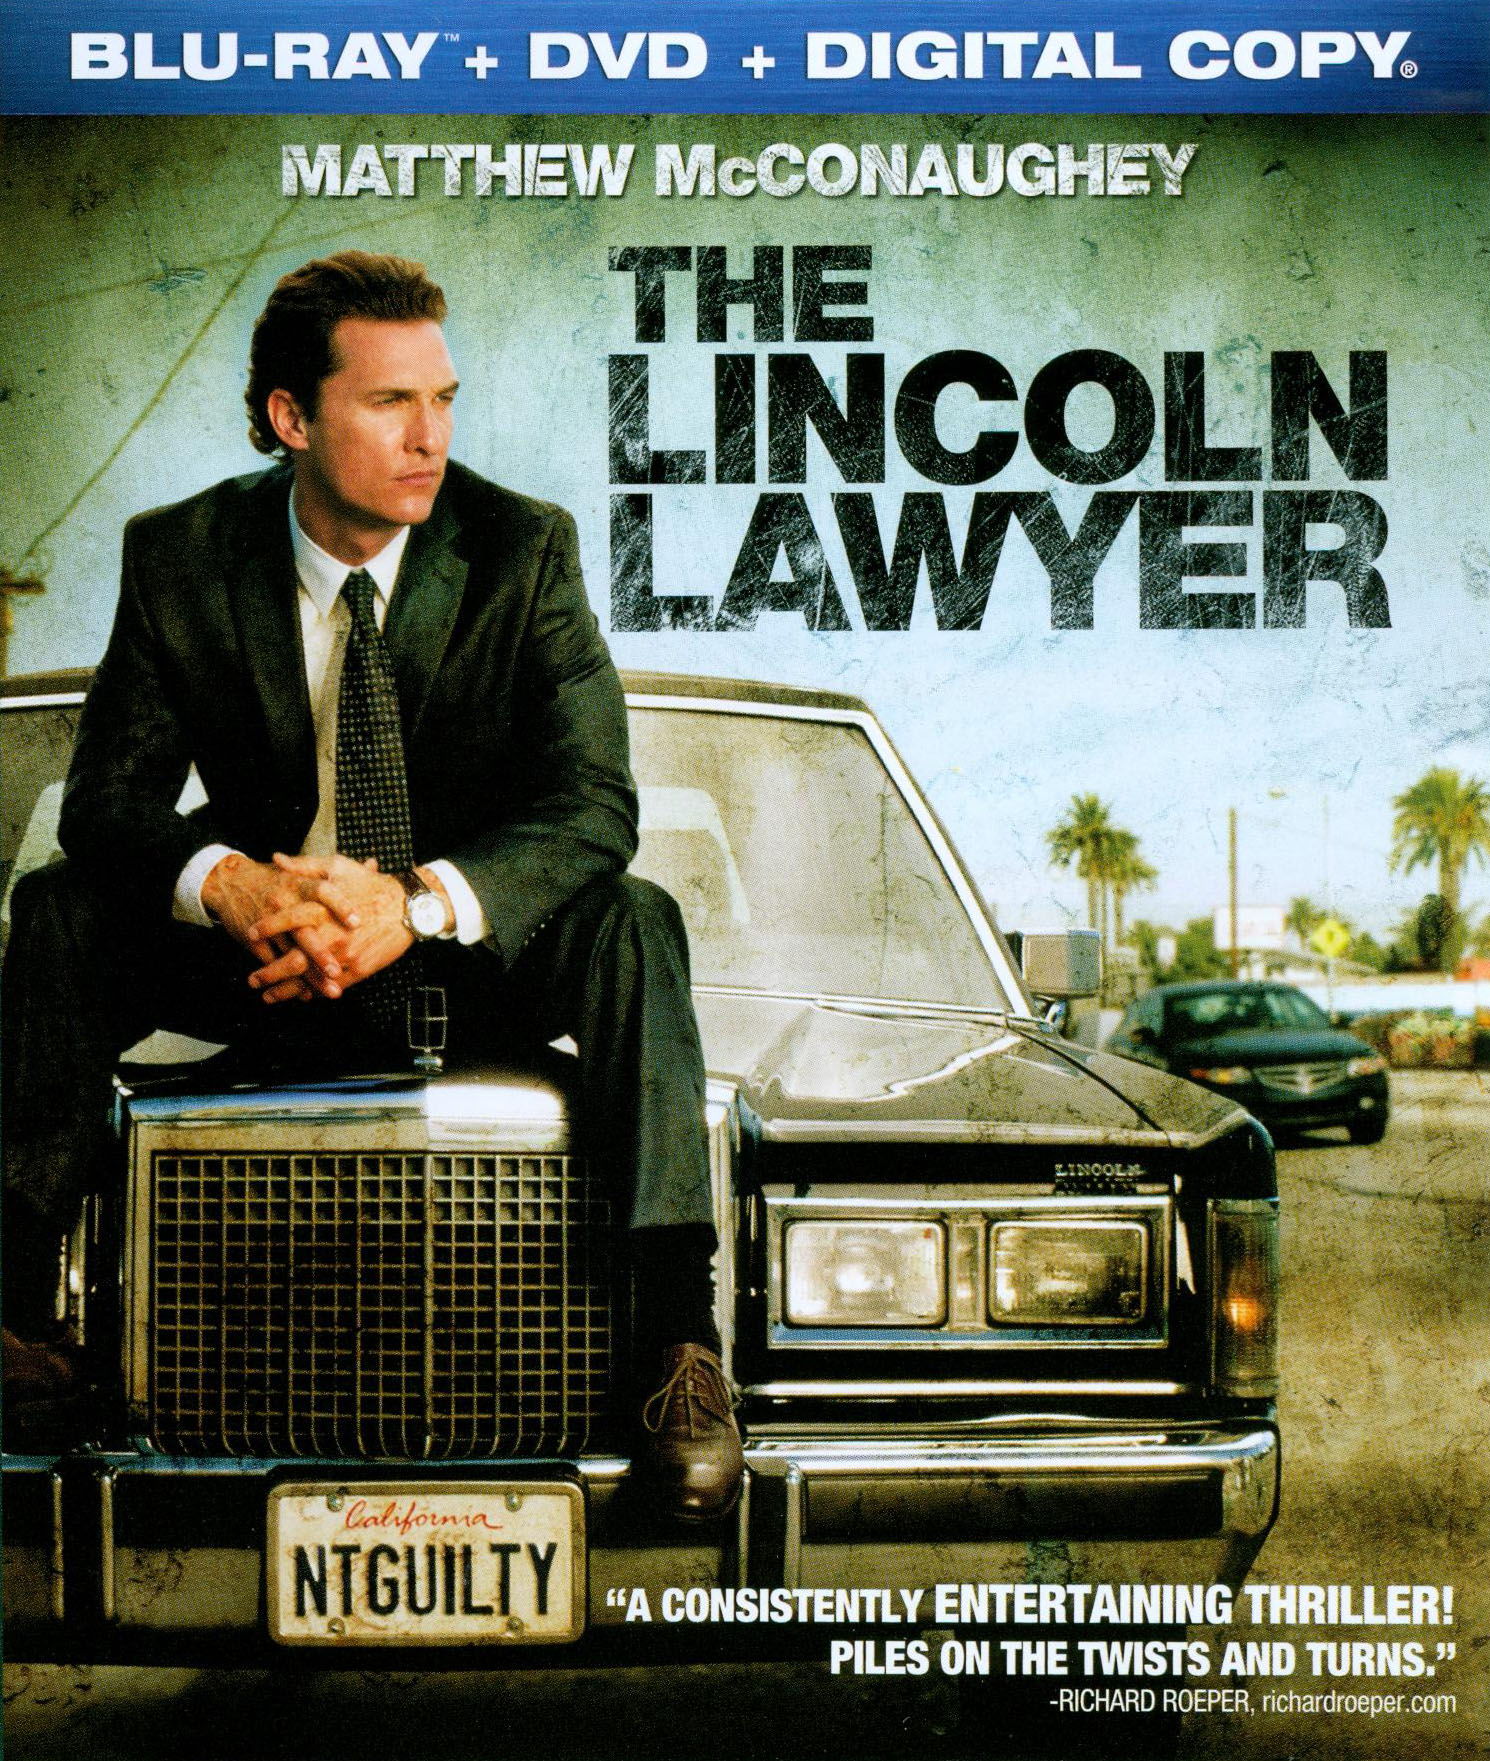 The Lincoln Lawyer [2 Discs] [Includes Digital Copy] [Blu-ray/DVD]